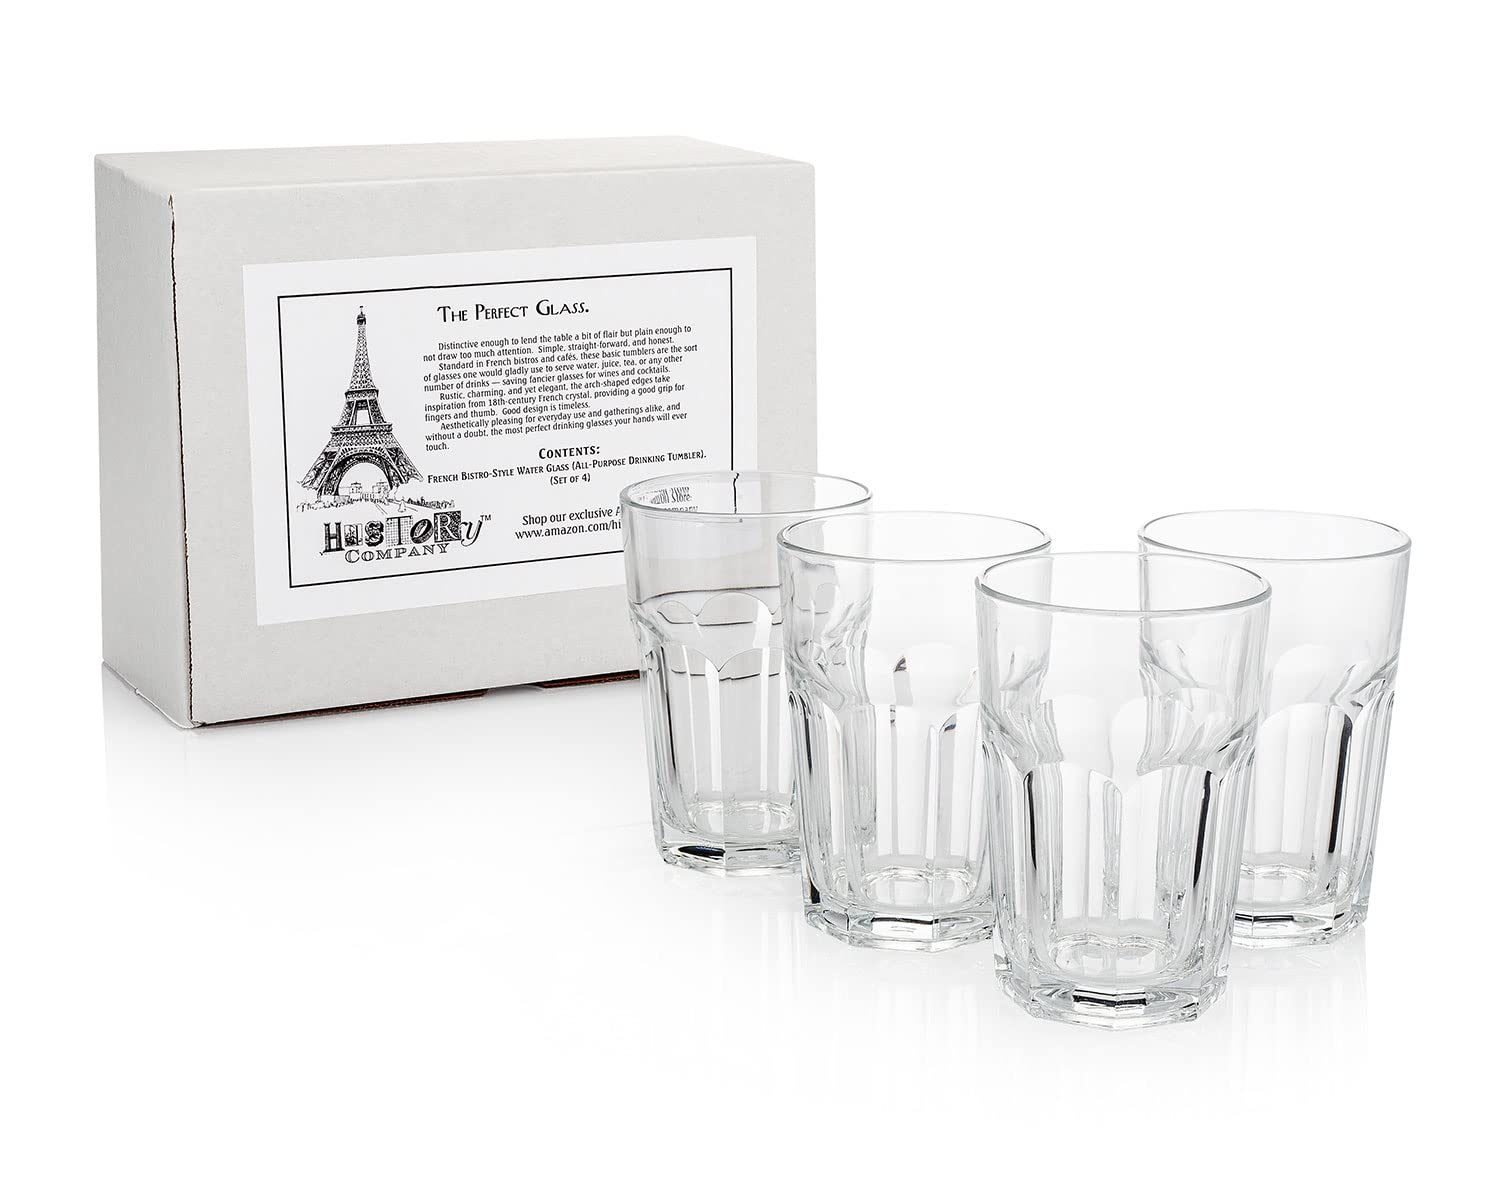 HISTORY COMPANY French Bistro Tempered Water Glass (All-Purpose Drinking Tumbler), 4-Piece Set (Gift Box Collection)